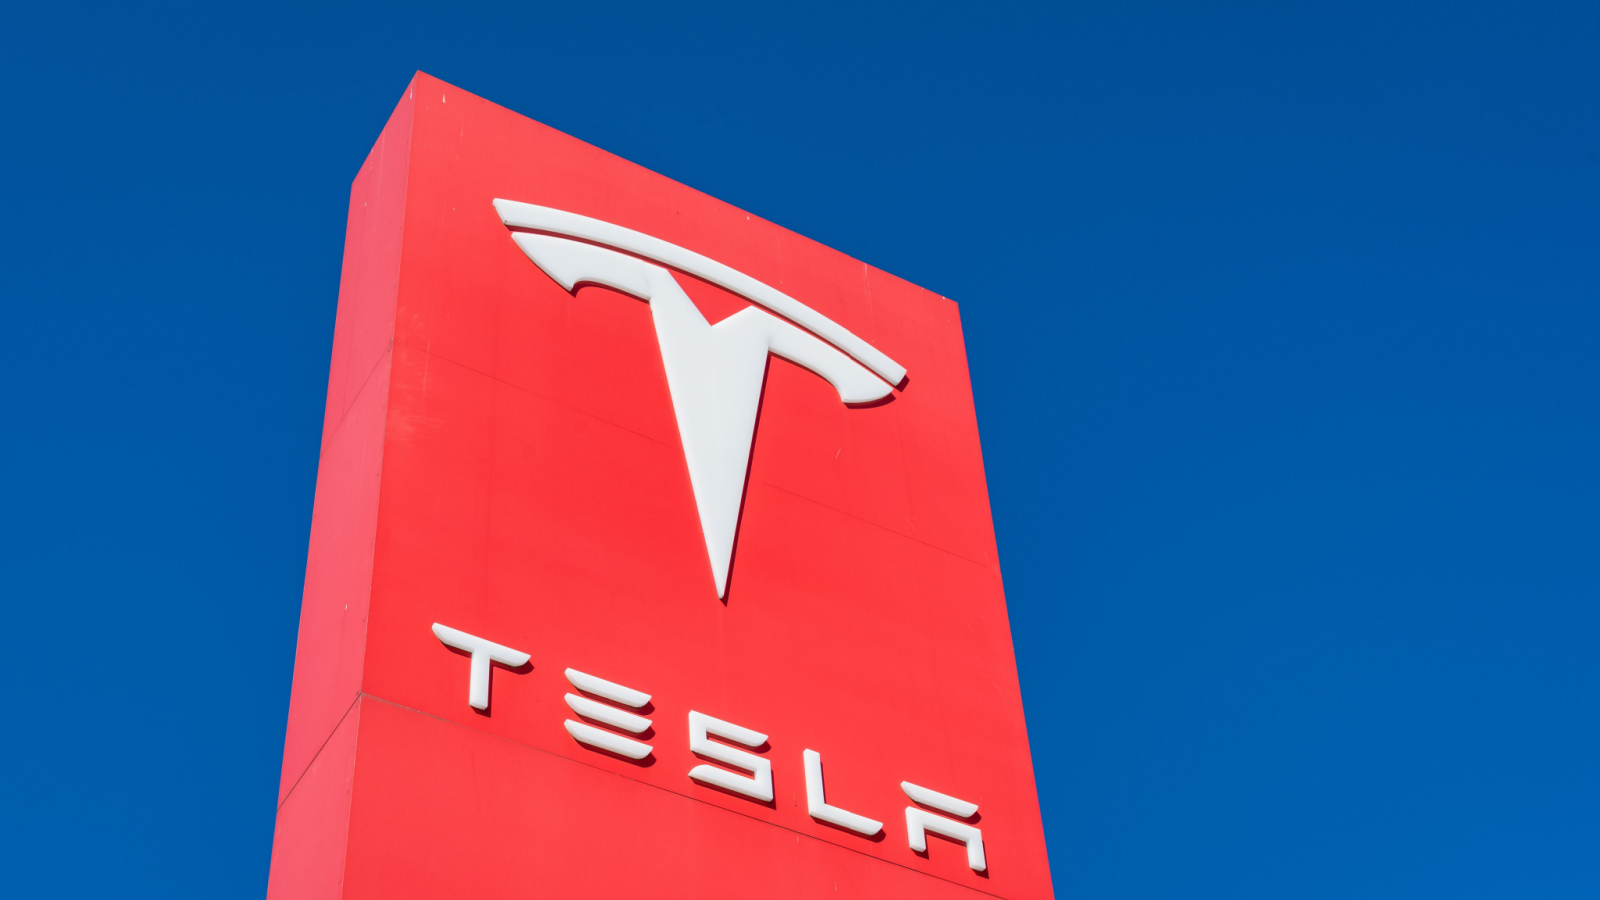 Tesla Motors (TSLA Stock) now an SP500 company with a busy Pond Springs location in northwest Austin, TX